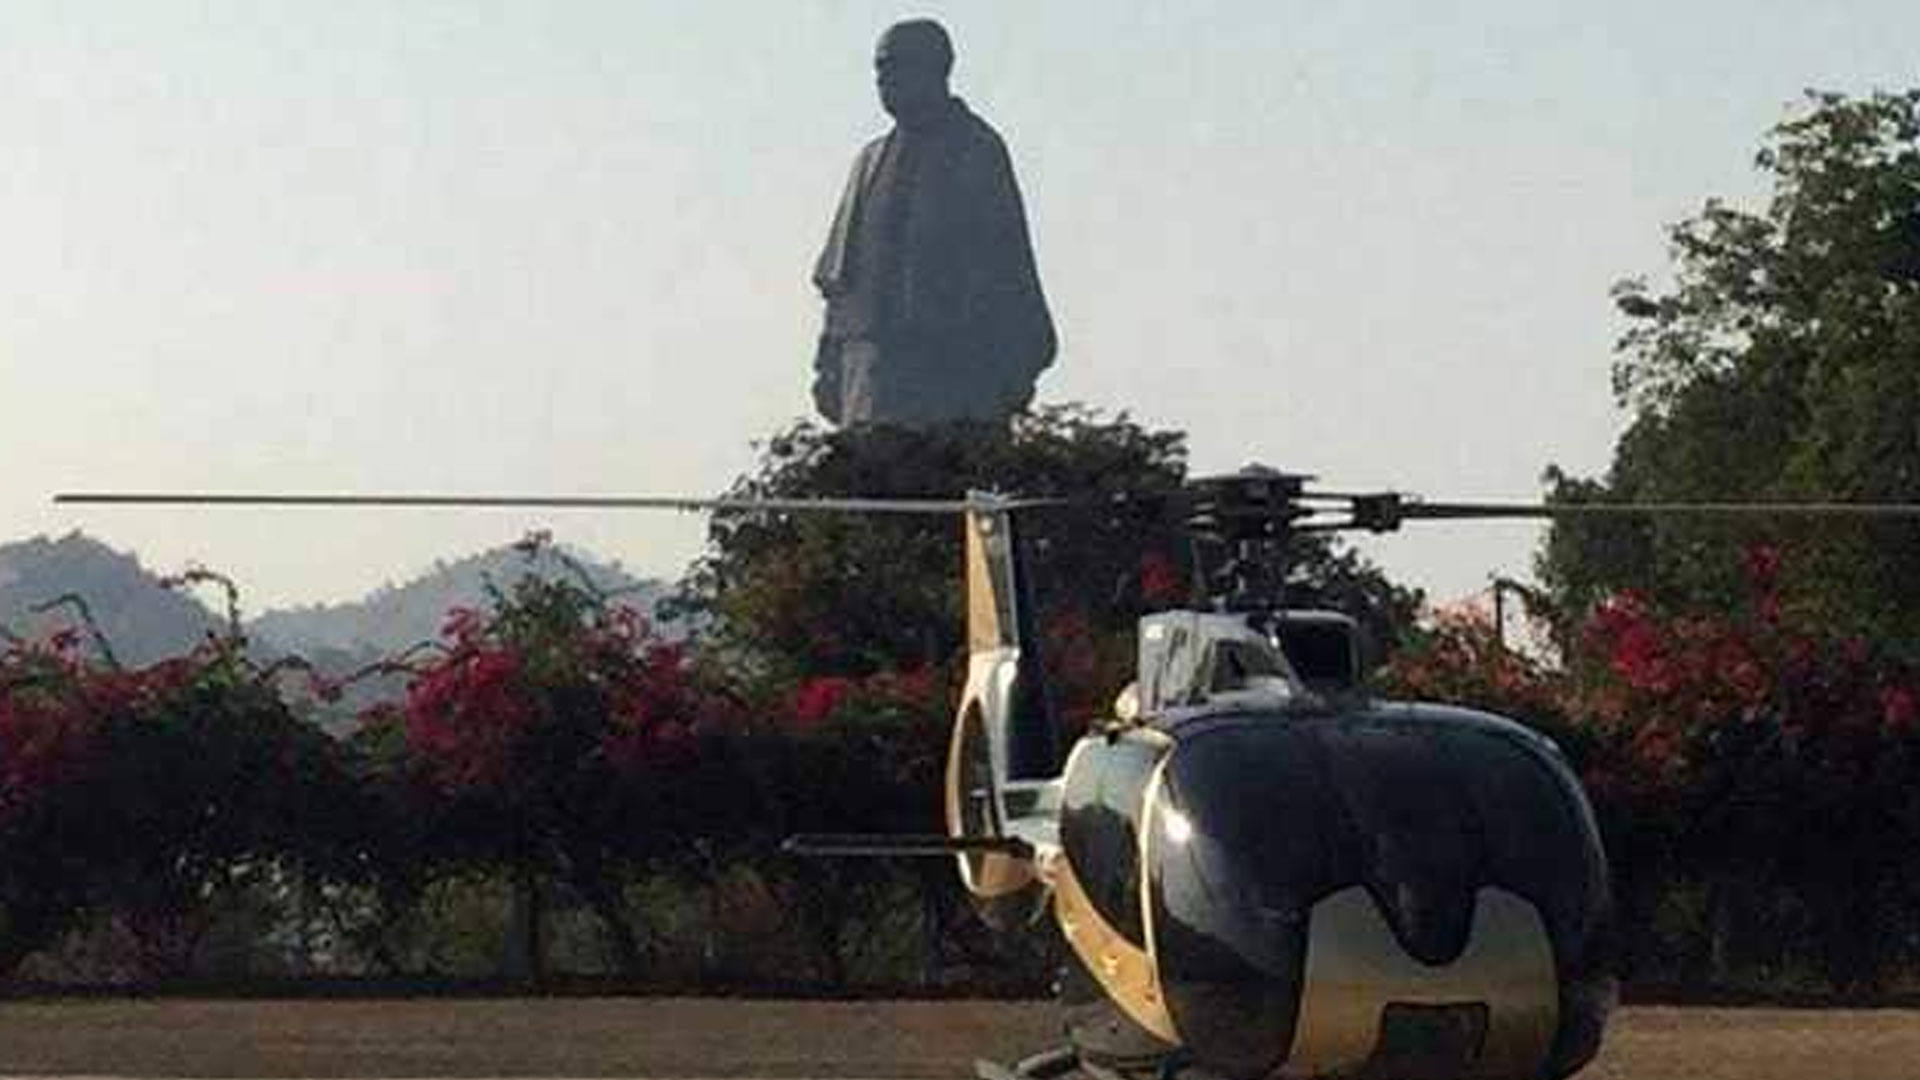 Statue-of-Unity Helicopter